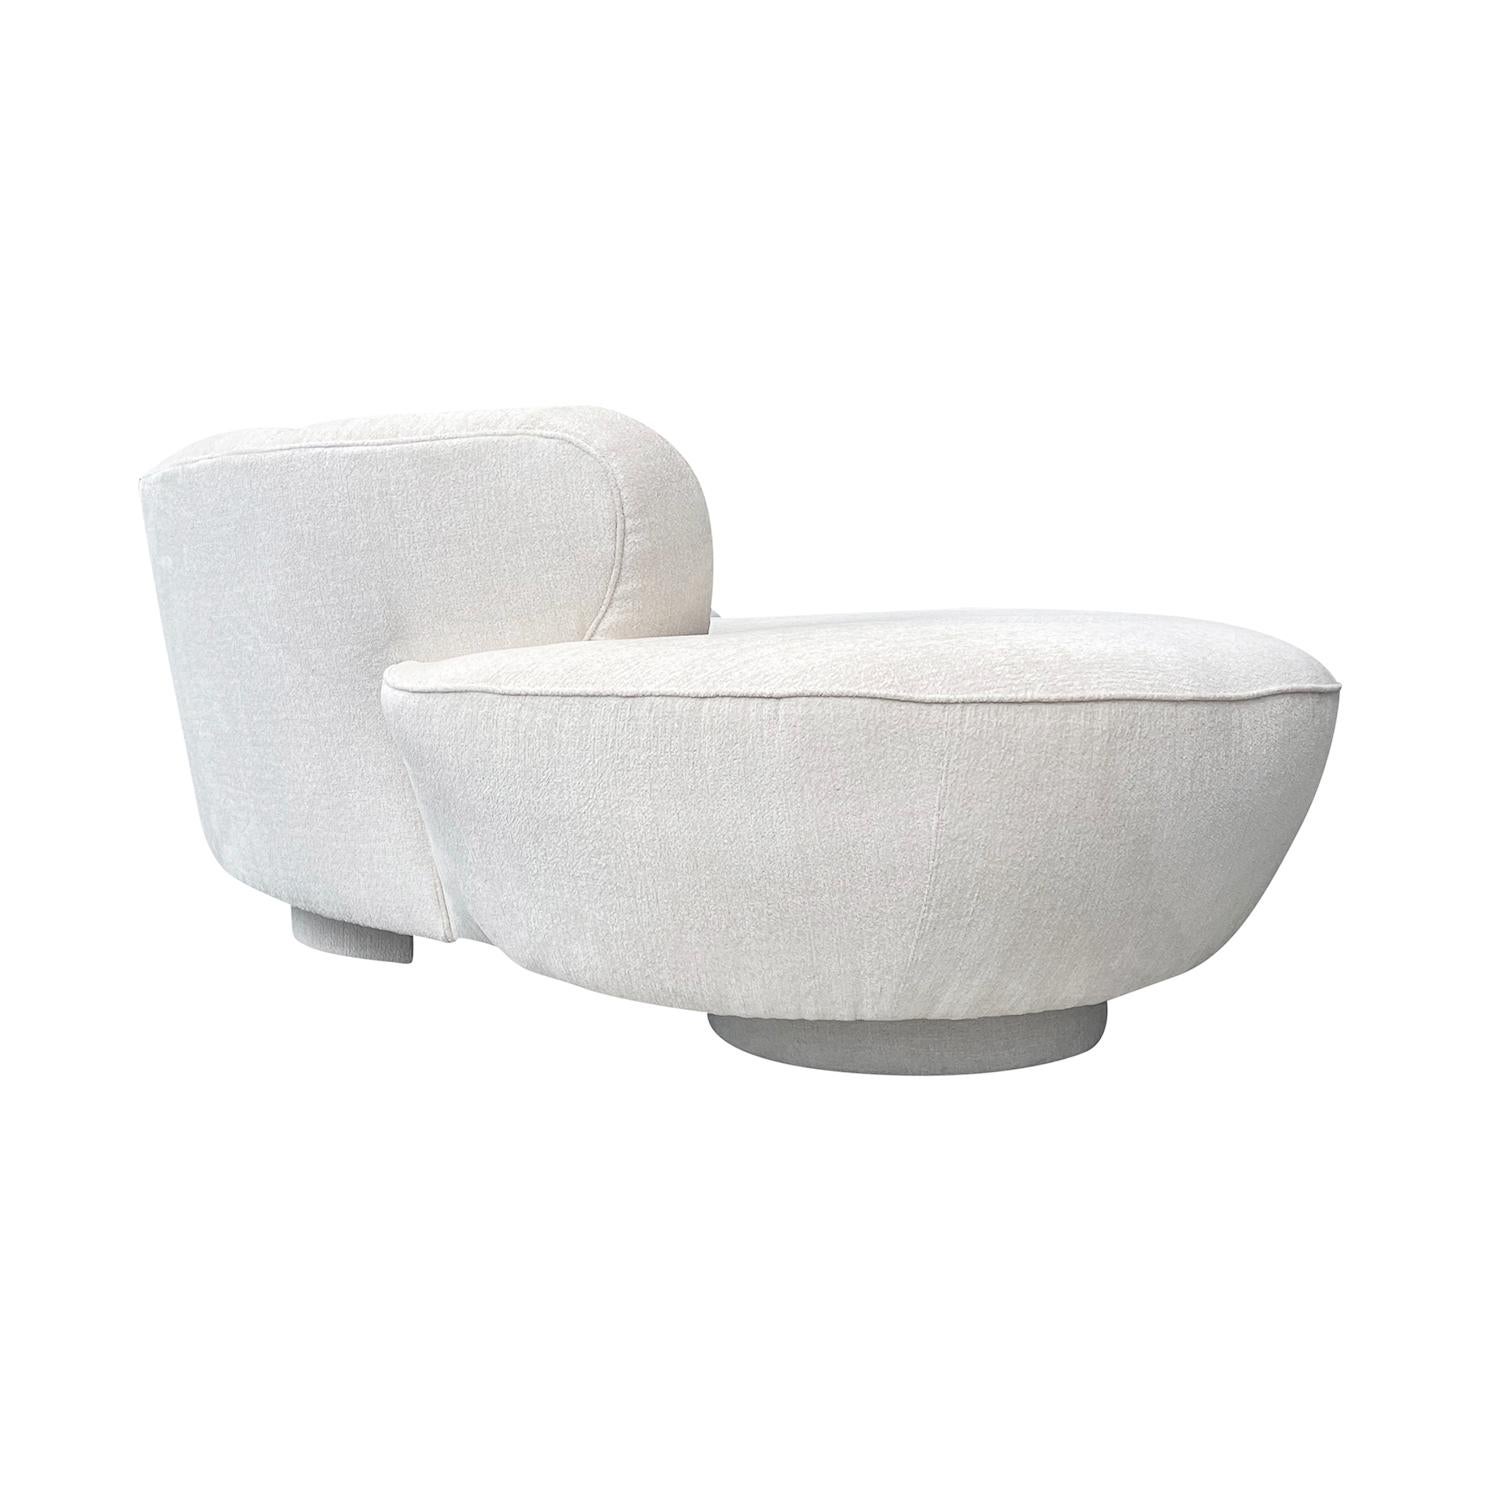 20th Century White American Directional Sofa, Curved Settee by Vladimir Kagan For Sale 1